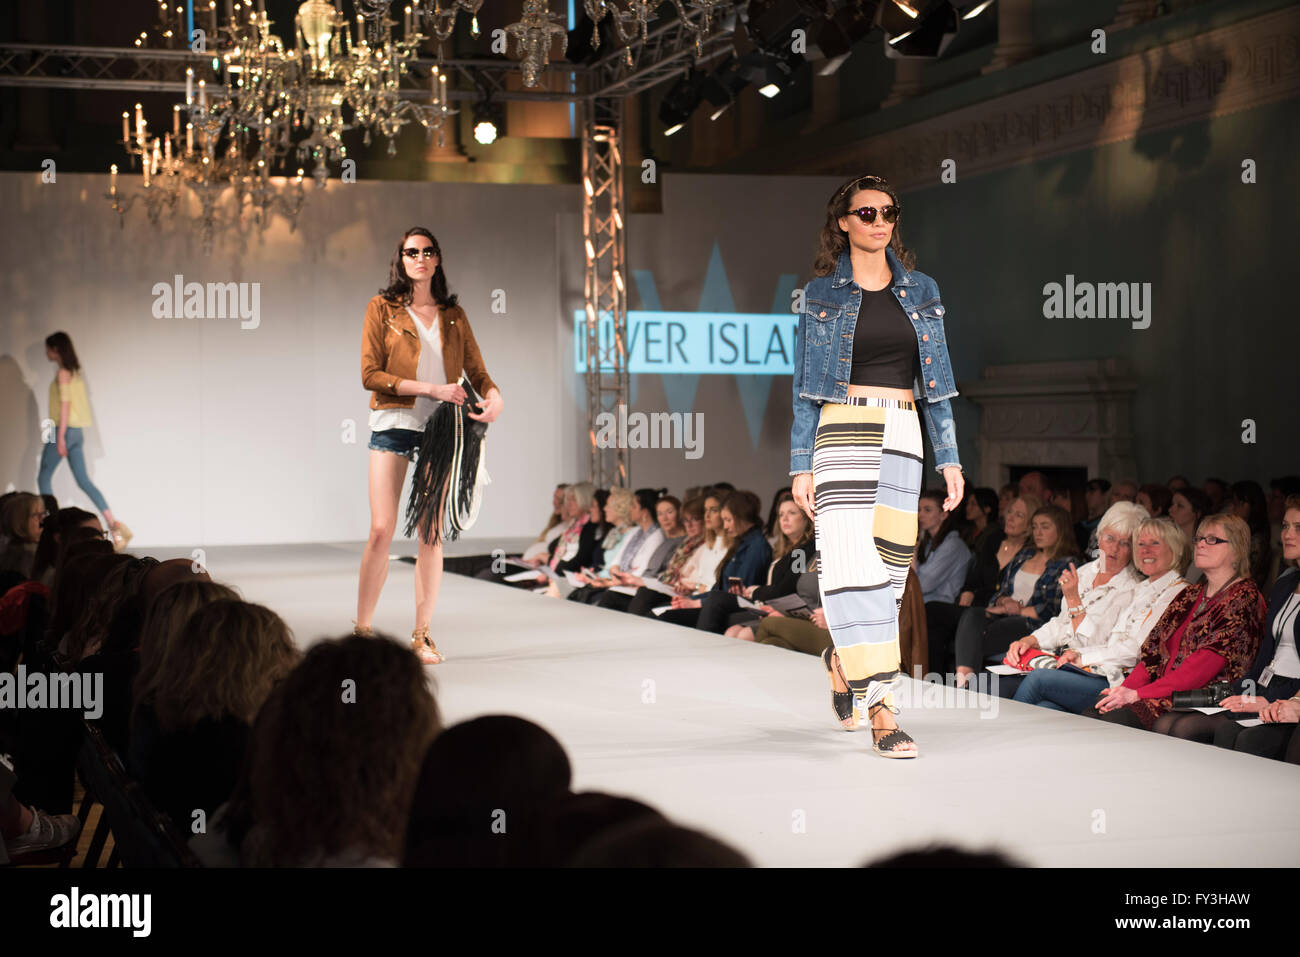 Alamy news Bath in Fashion 2016. Catwalk. Shops. Model. Spring Summer 2016. River Island.Beauty. Events. People watching. Trends Stock Photo